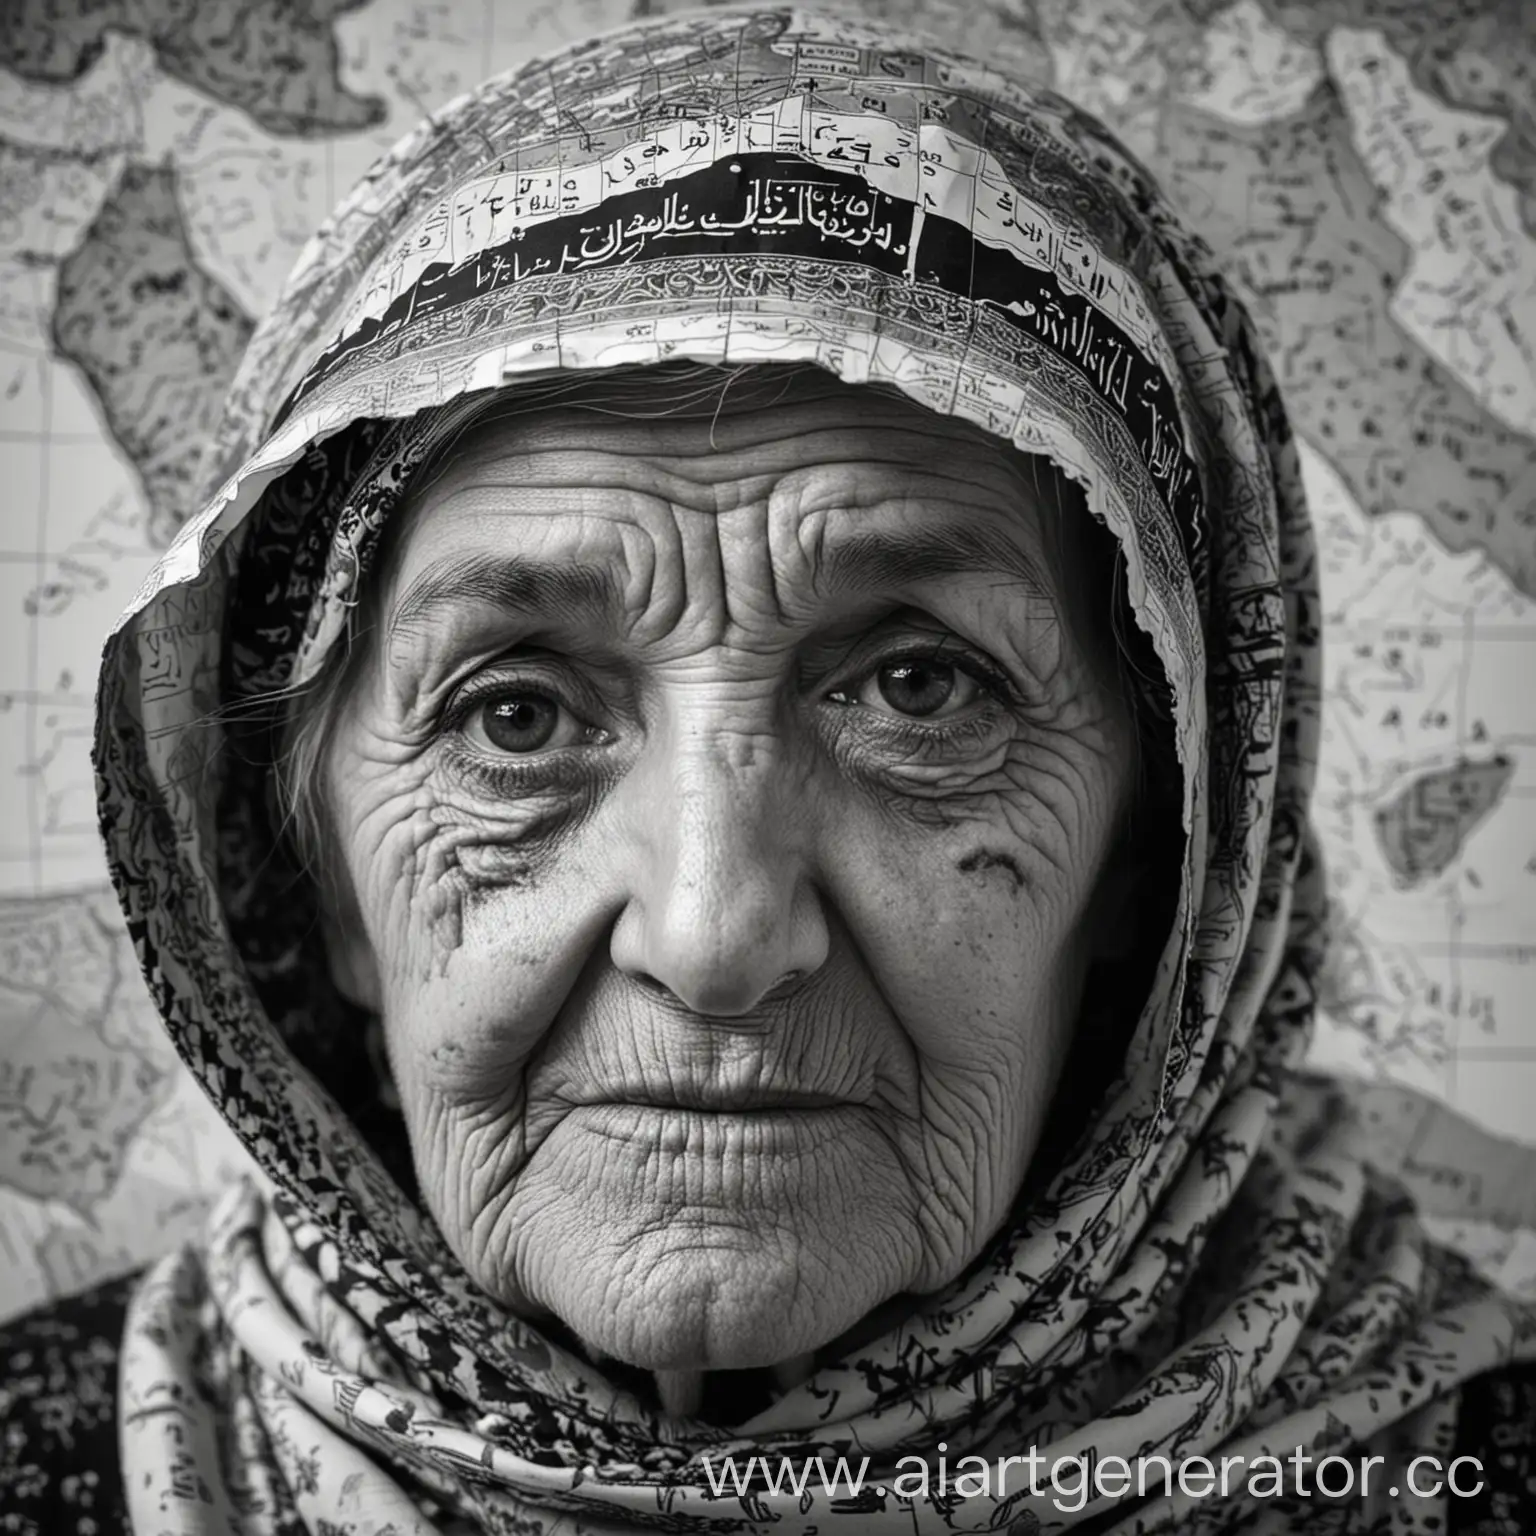 Elderly-Woman-with-Covered-Head-Featuring-Prominent-Map-of-Iraq-in-Black-and-White